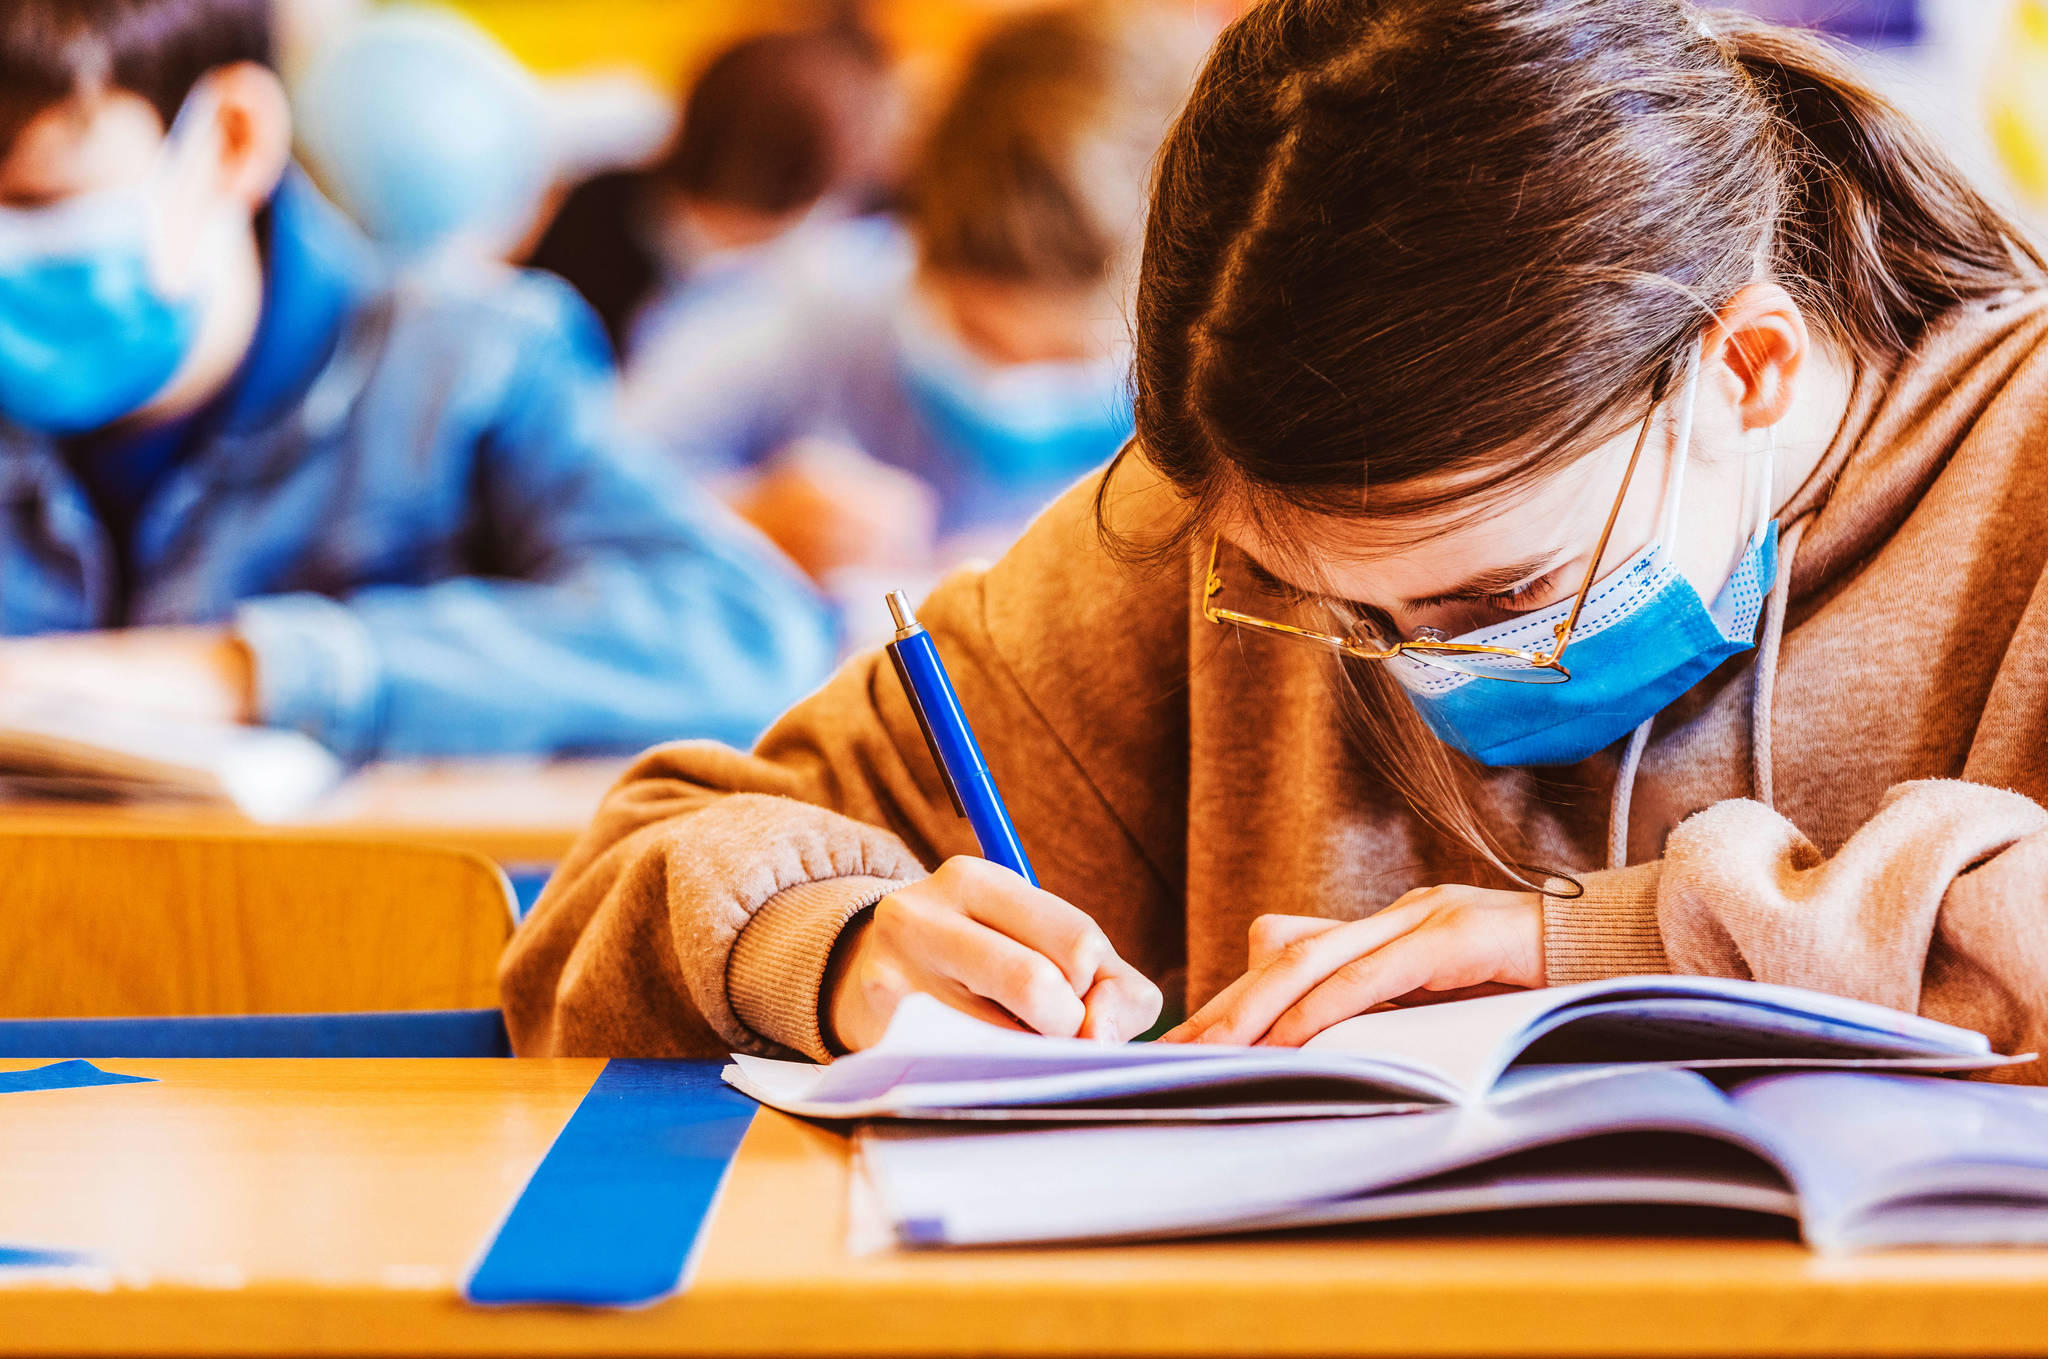 B.C. teachers are calling on the province to take a cautious approach, including a K–12 mask mandate to begin the 2021/22 school year. (File photo)